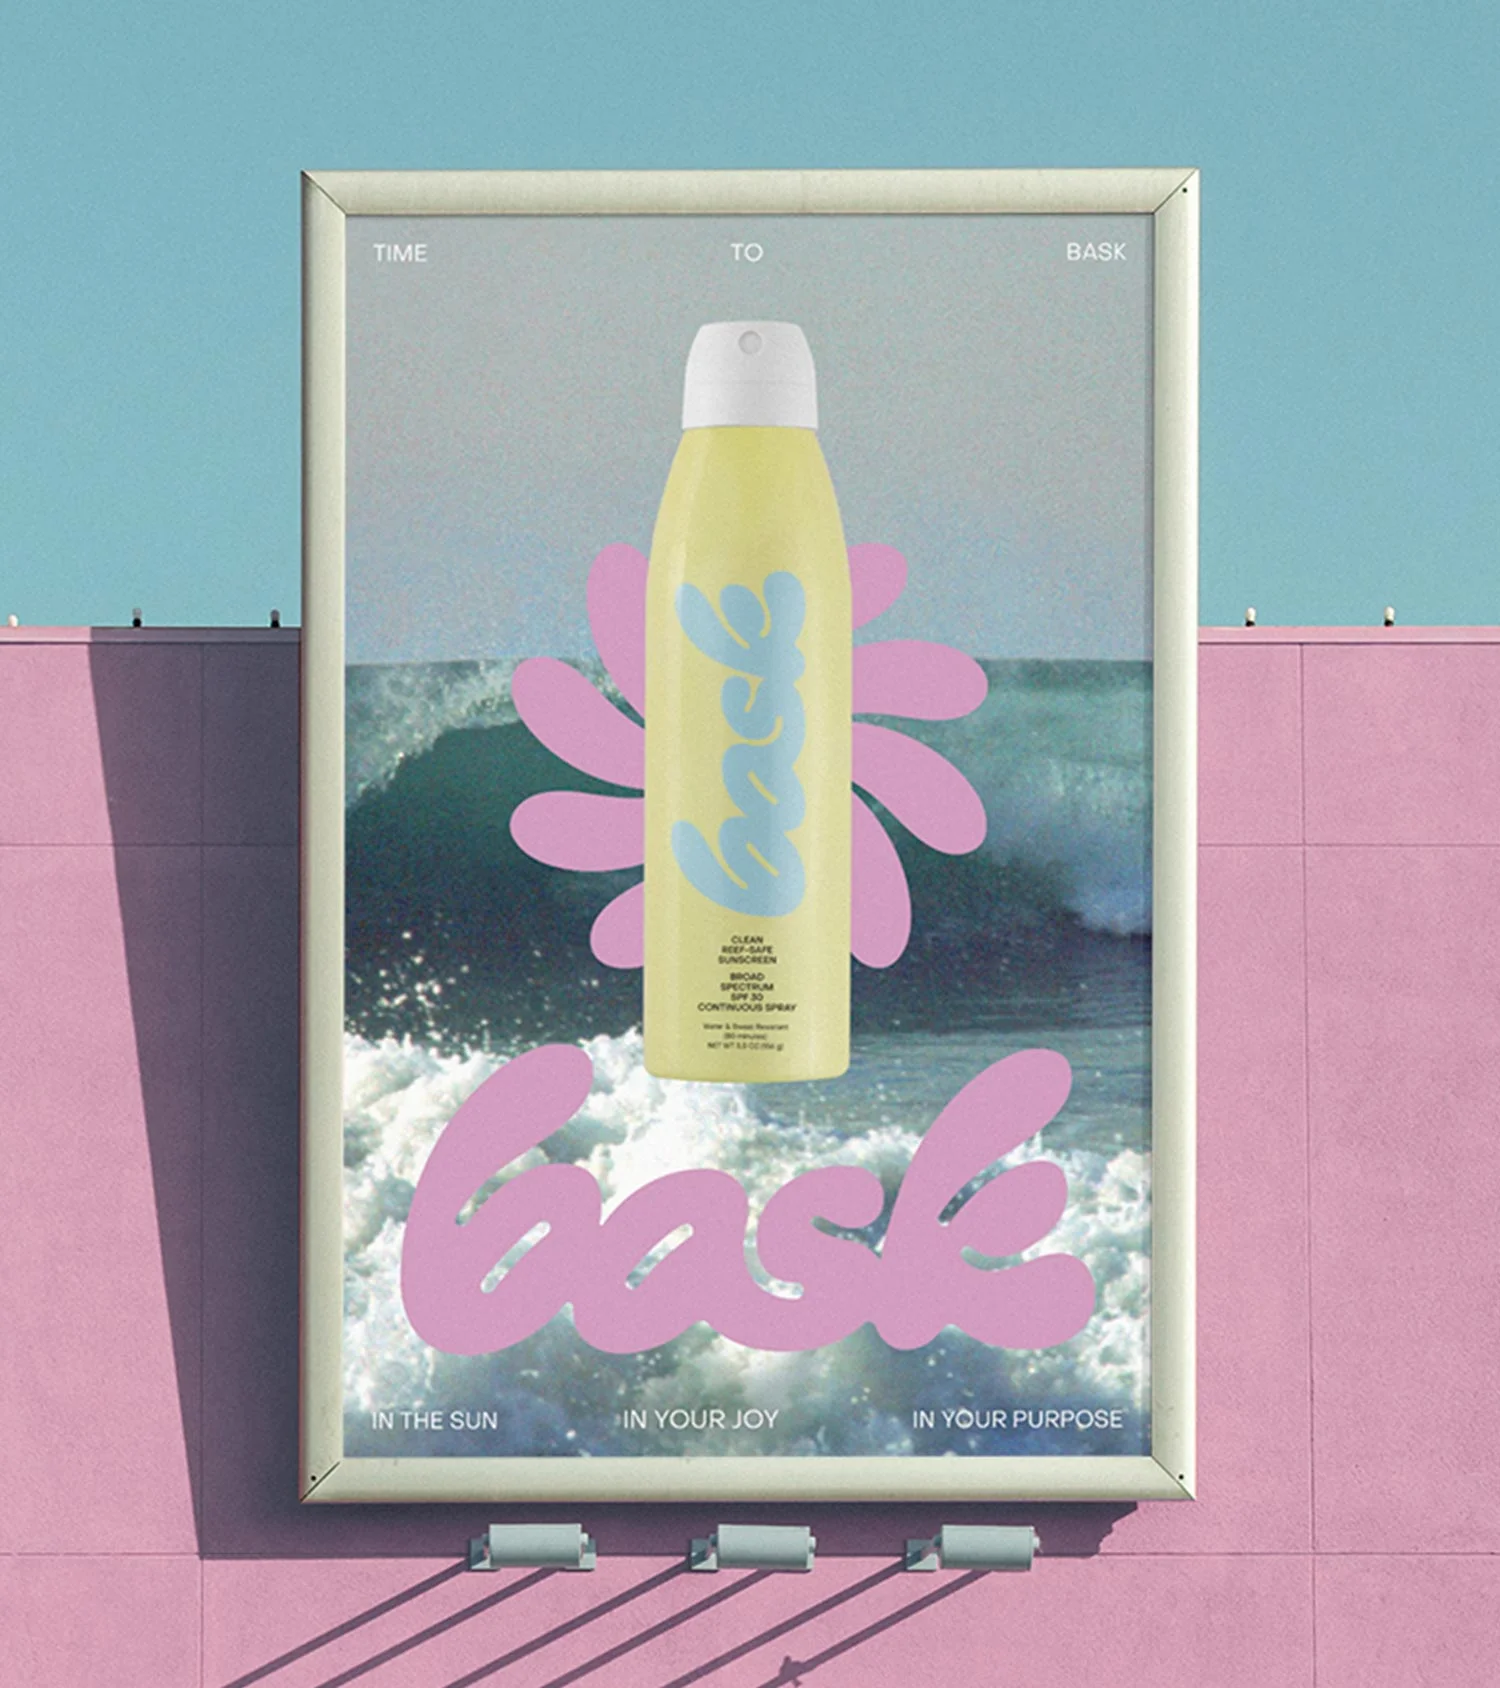 Bask Yellow Continuous Spray Bottle Poster on a Billboard by RoAndCo